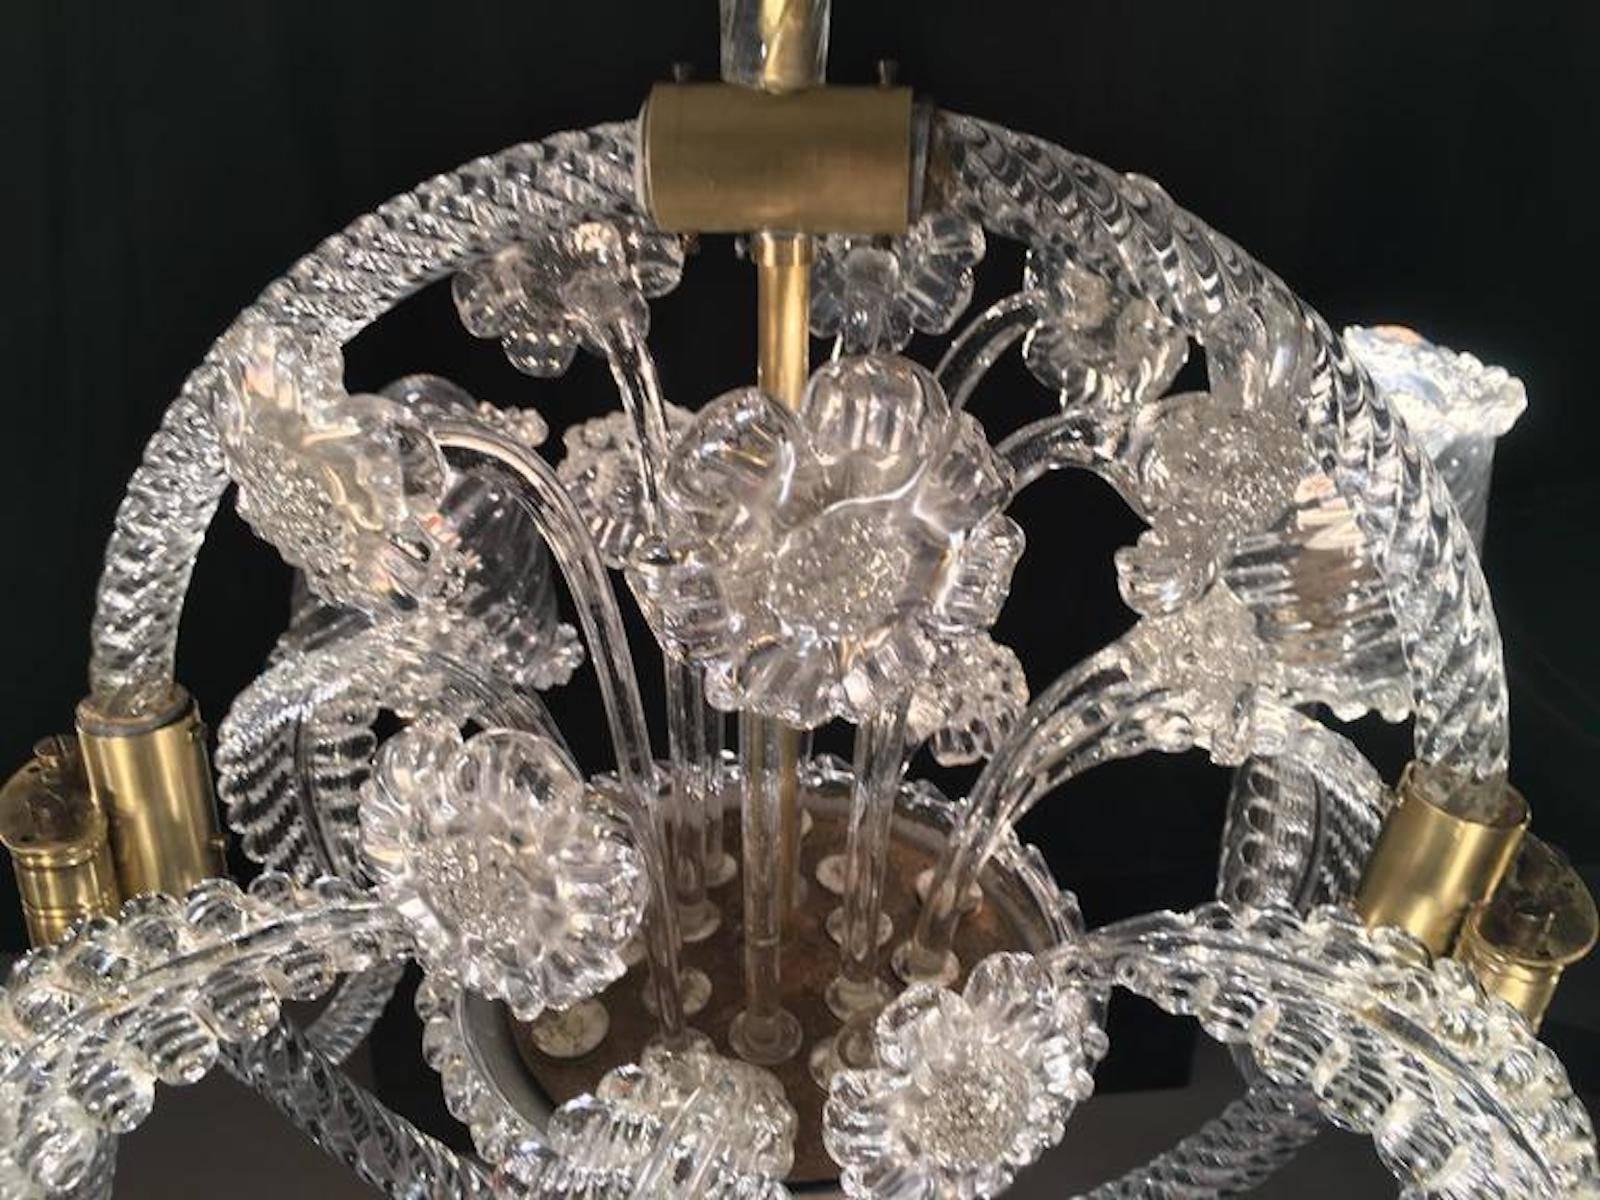 Majestic Liberty Chandelier by Ercole Barovier, Murano, 1940s For Sale 5